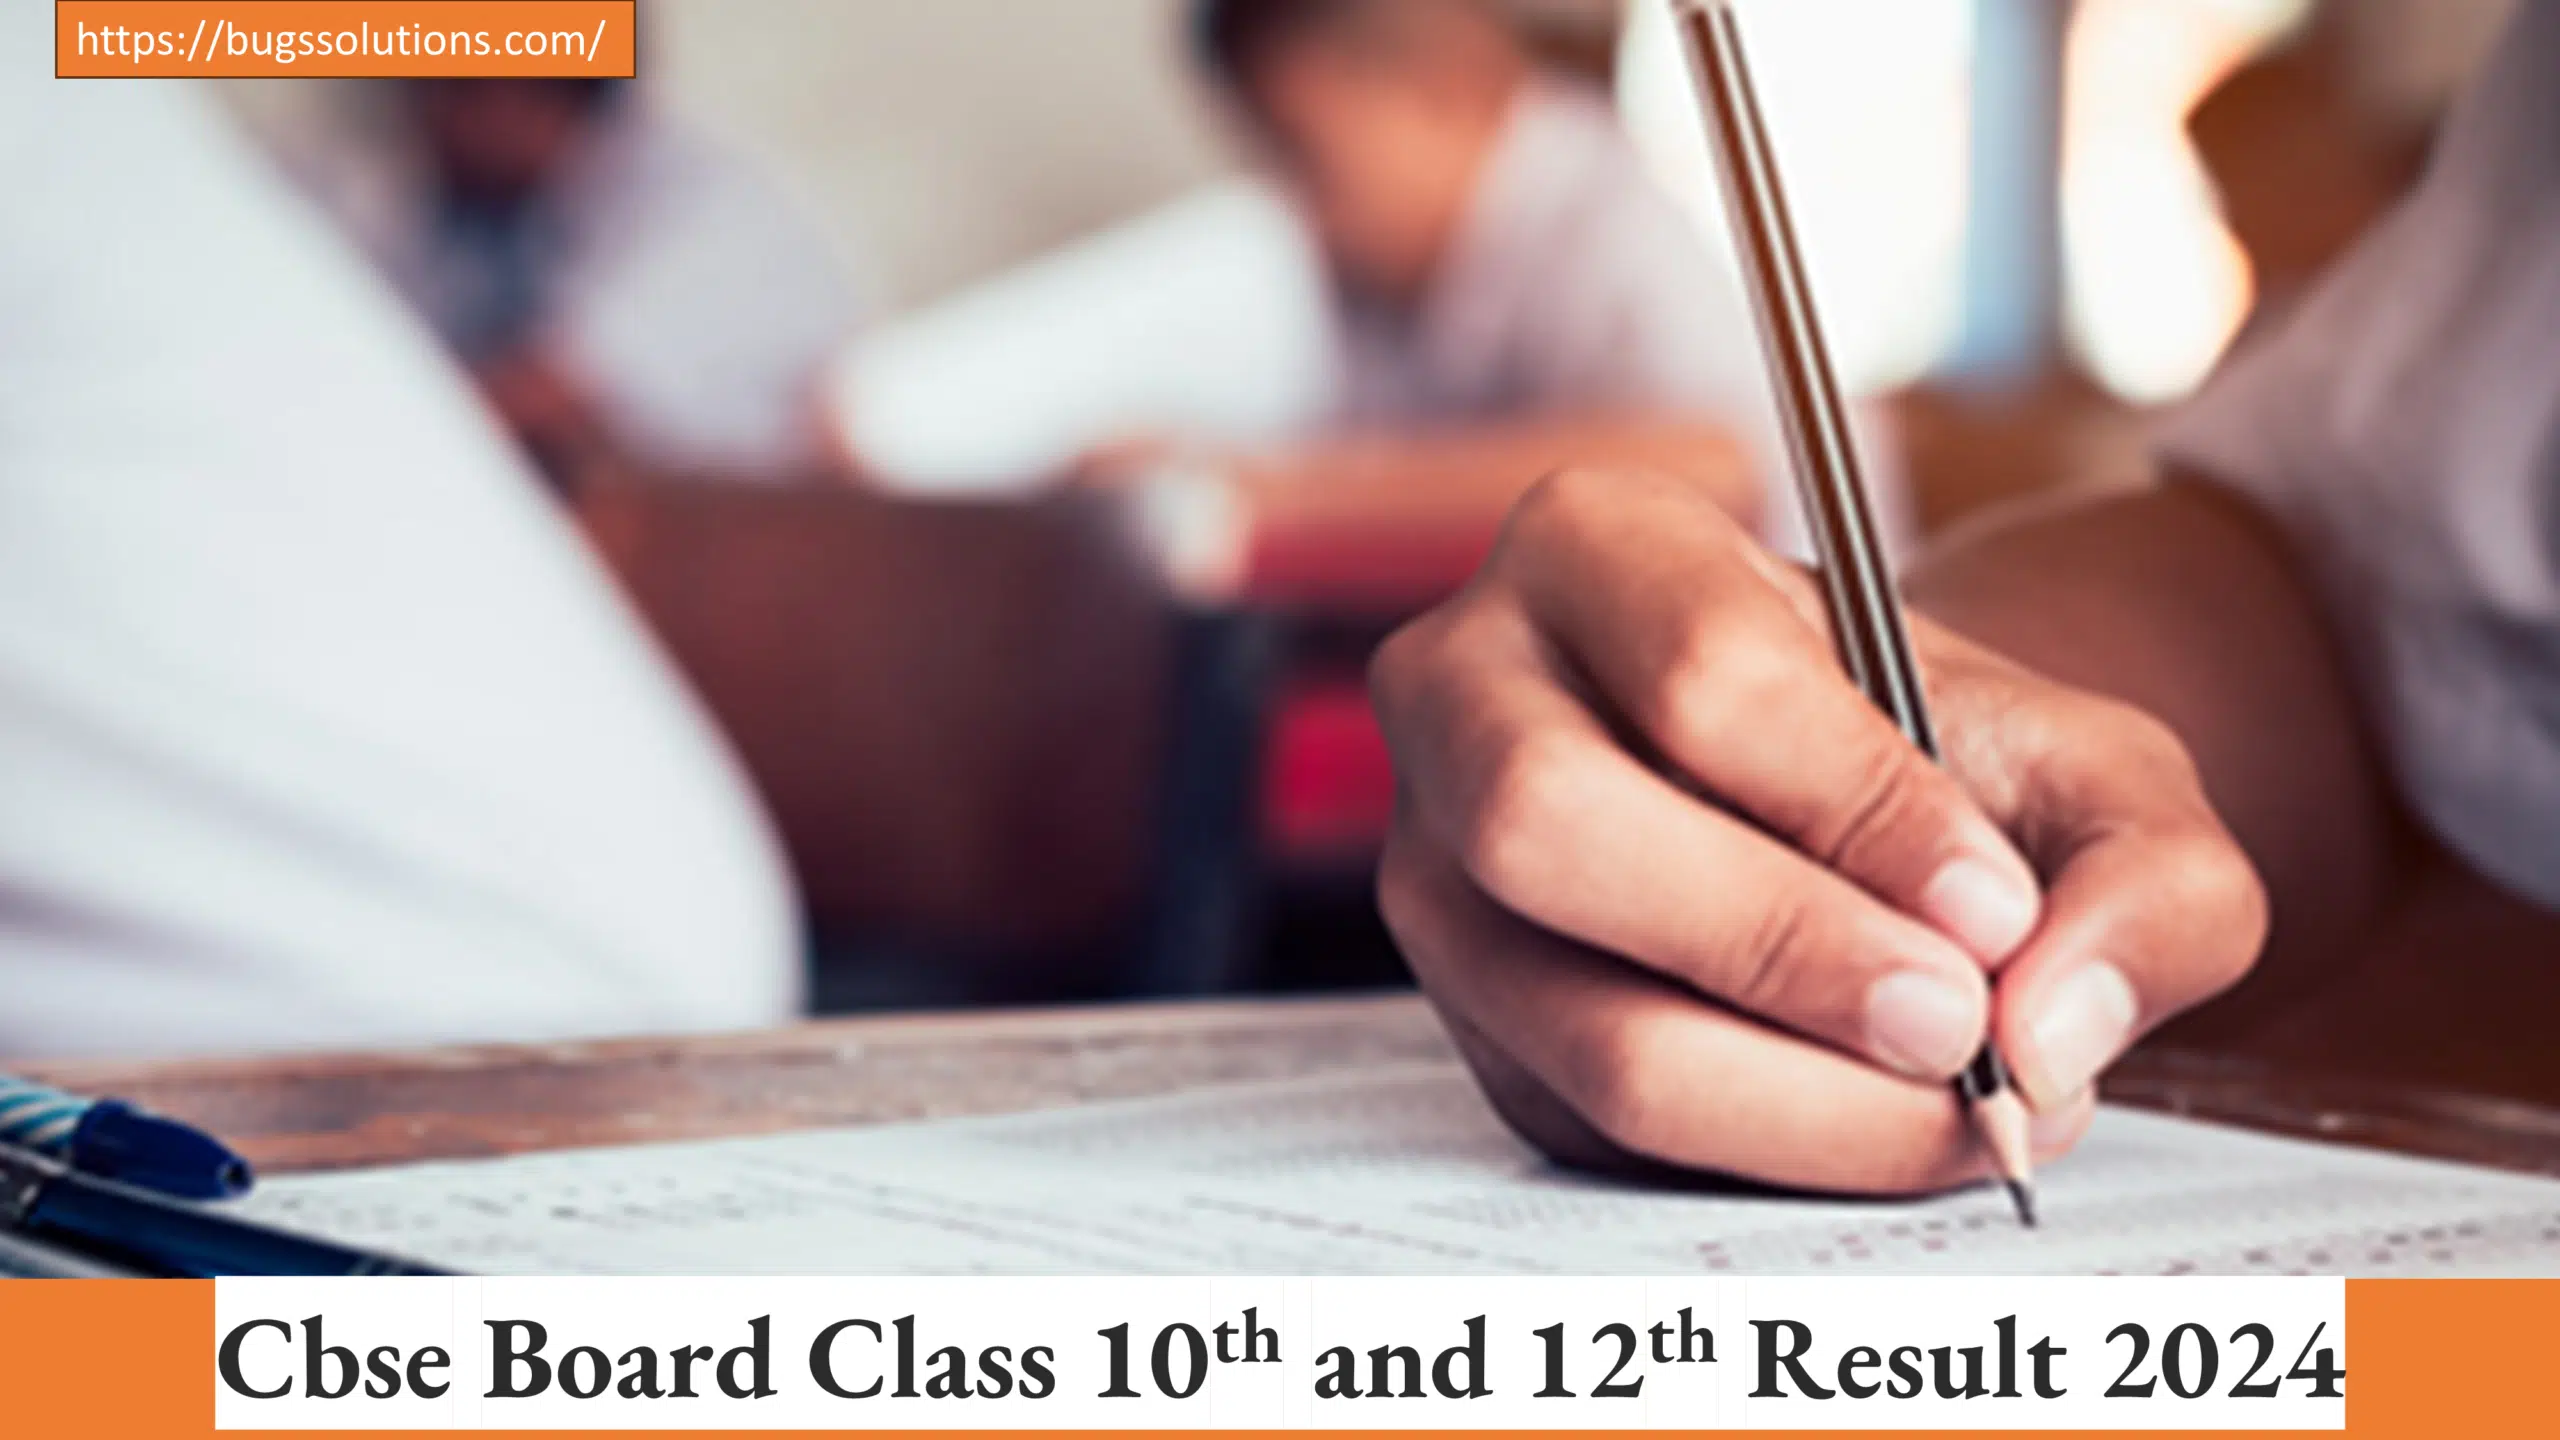 CBSE Board class 10th and 12th result 2024 are expected to be released the following month.